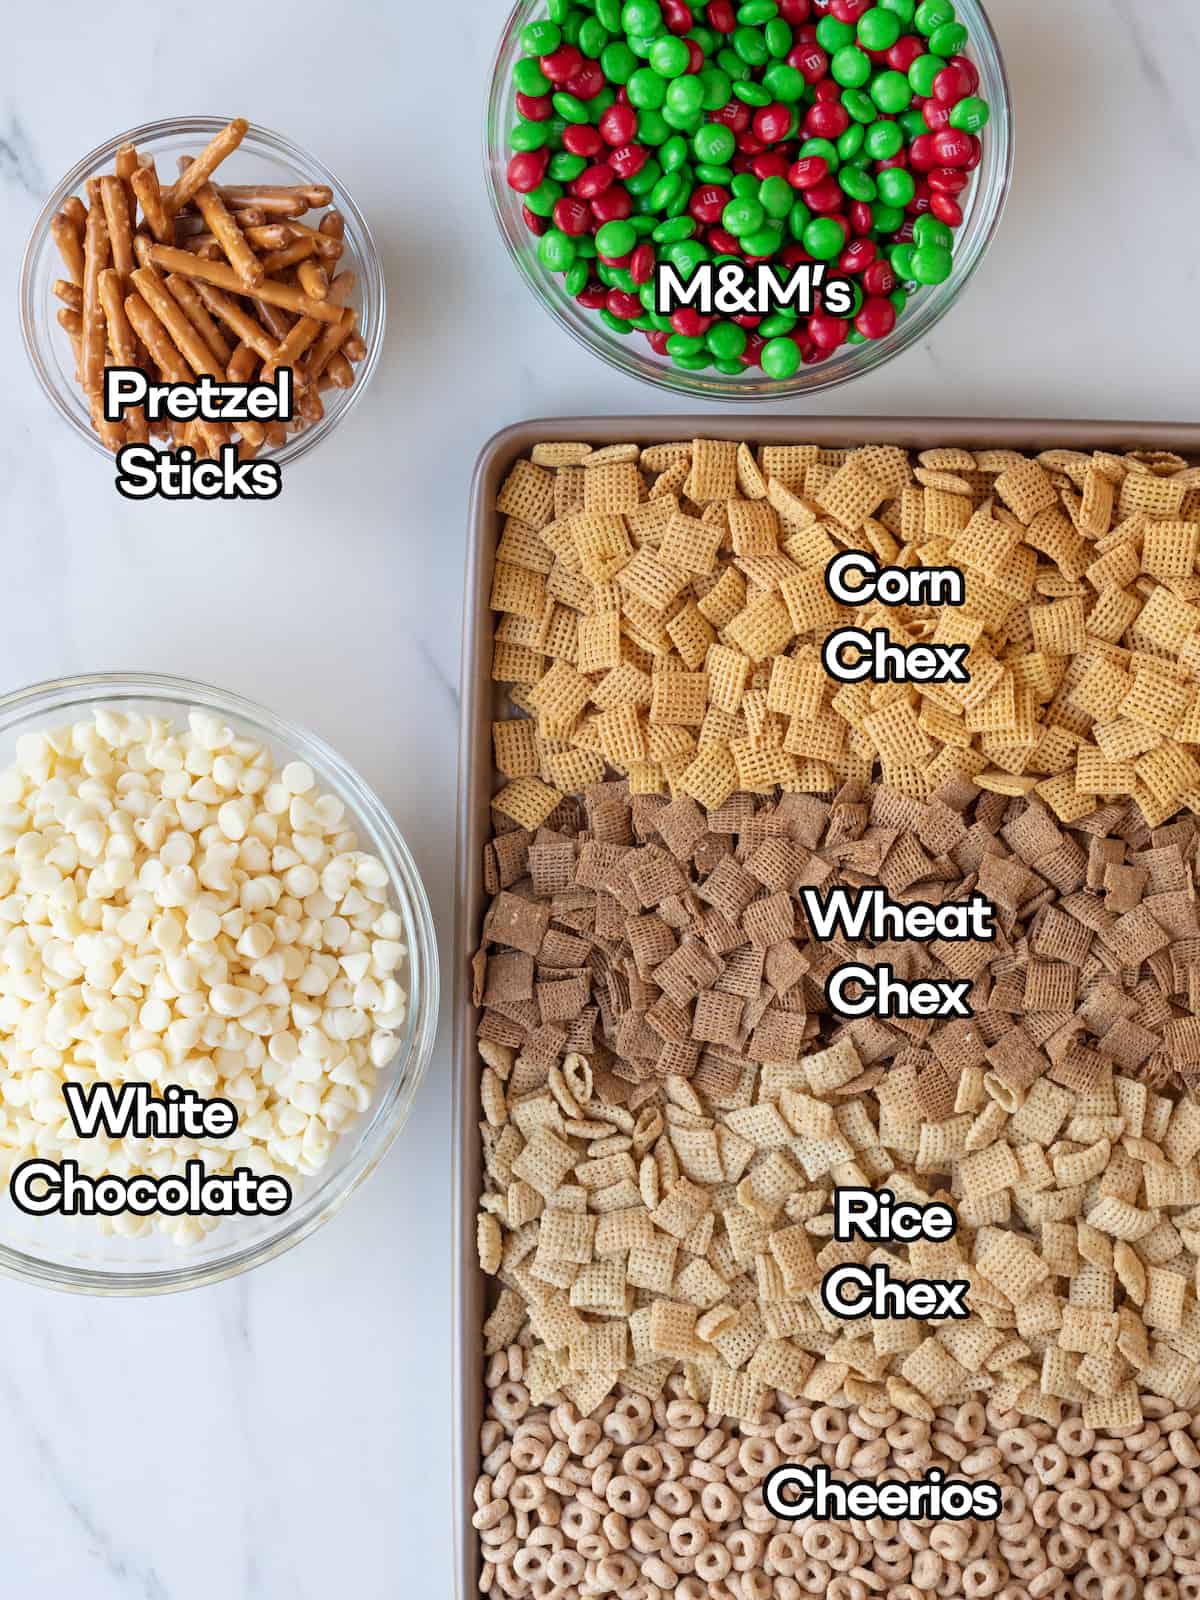 Chex Christmas Mix (aka Christmas Crack): The Best Holiday Treat